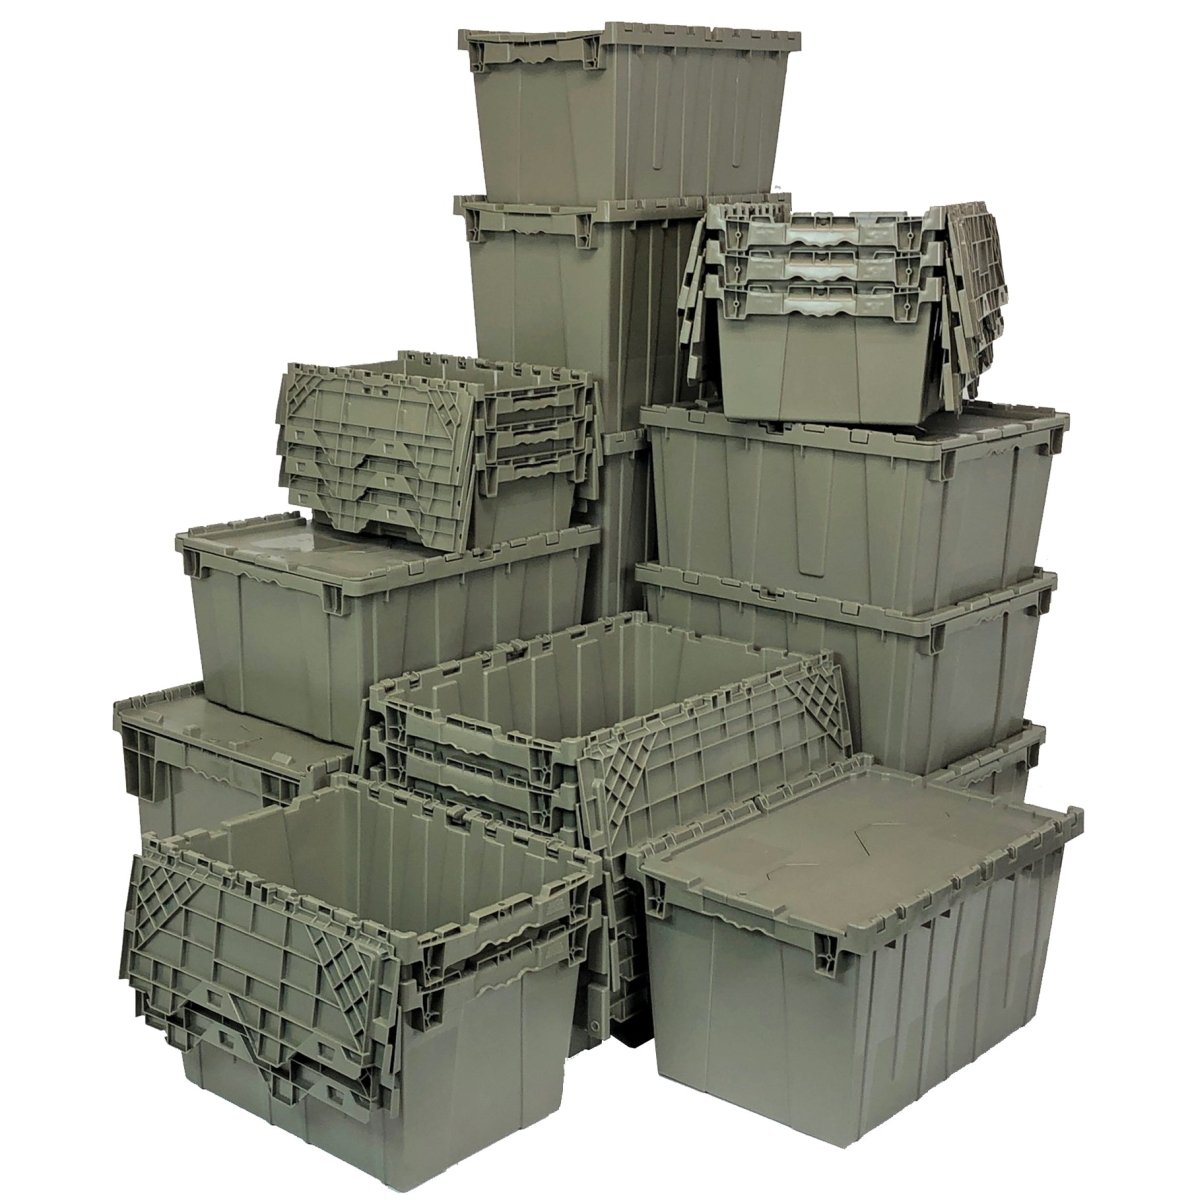 Attached Lid Containers & The Moving Industry - Industrial 4 Less